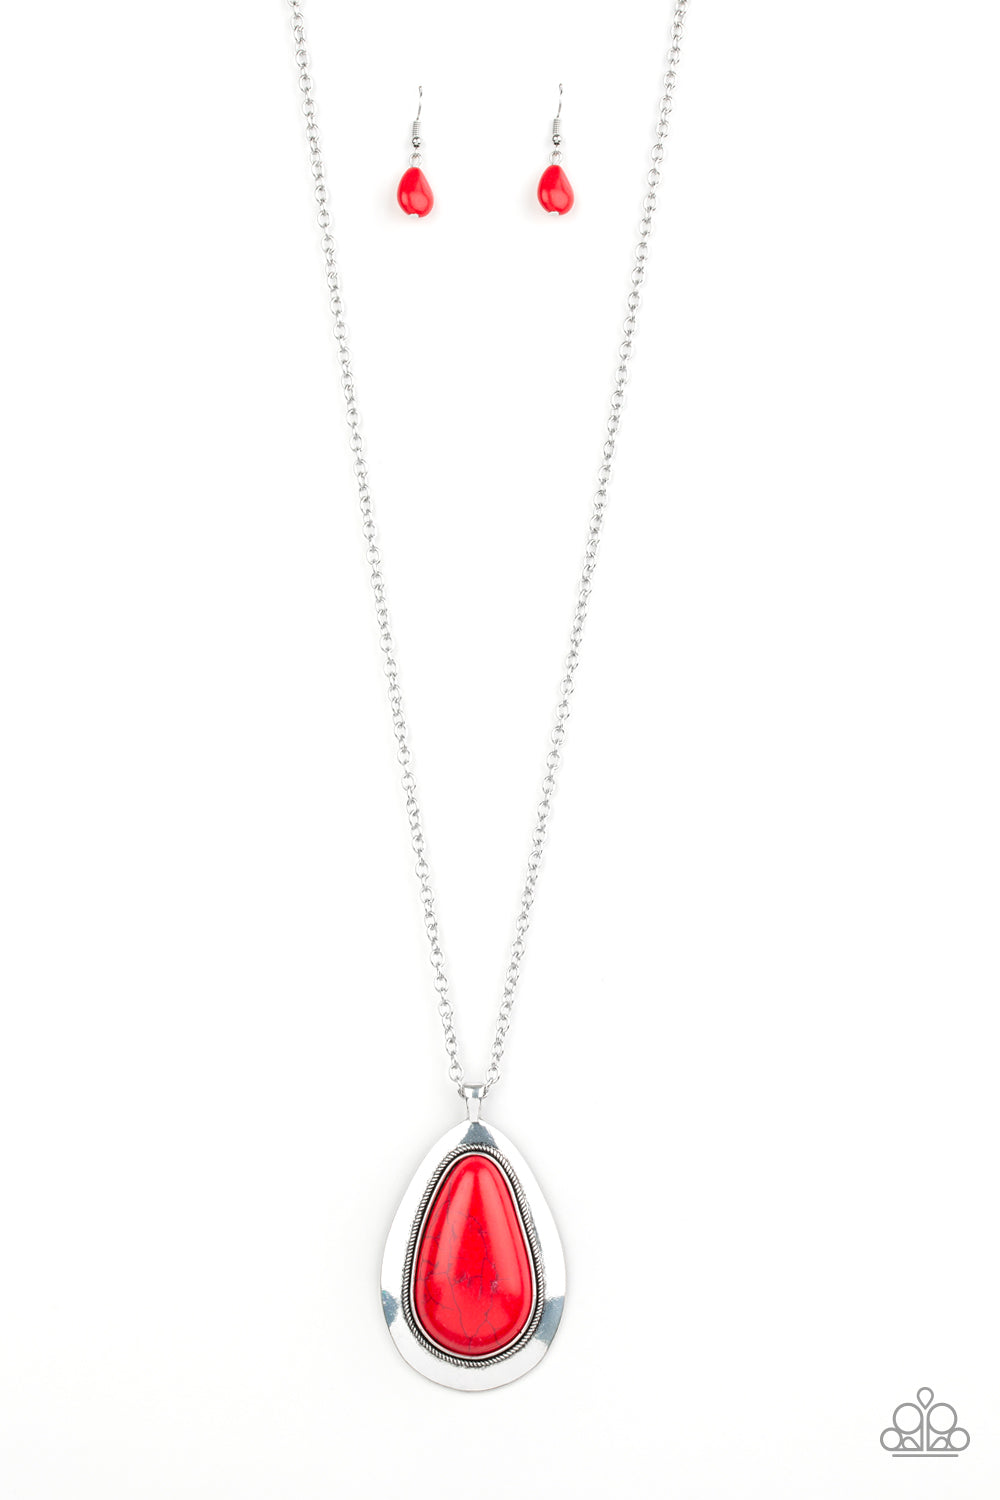 BADLAND To The Bone - Red necklace 2114